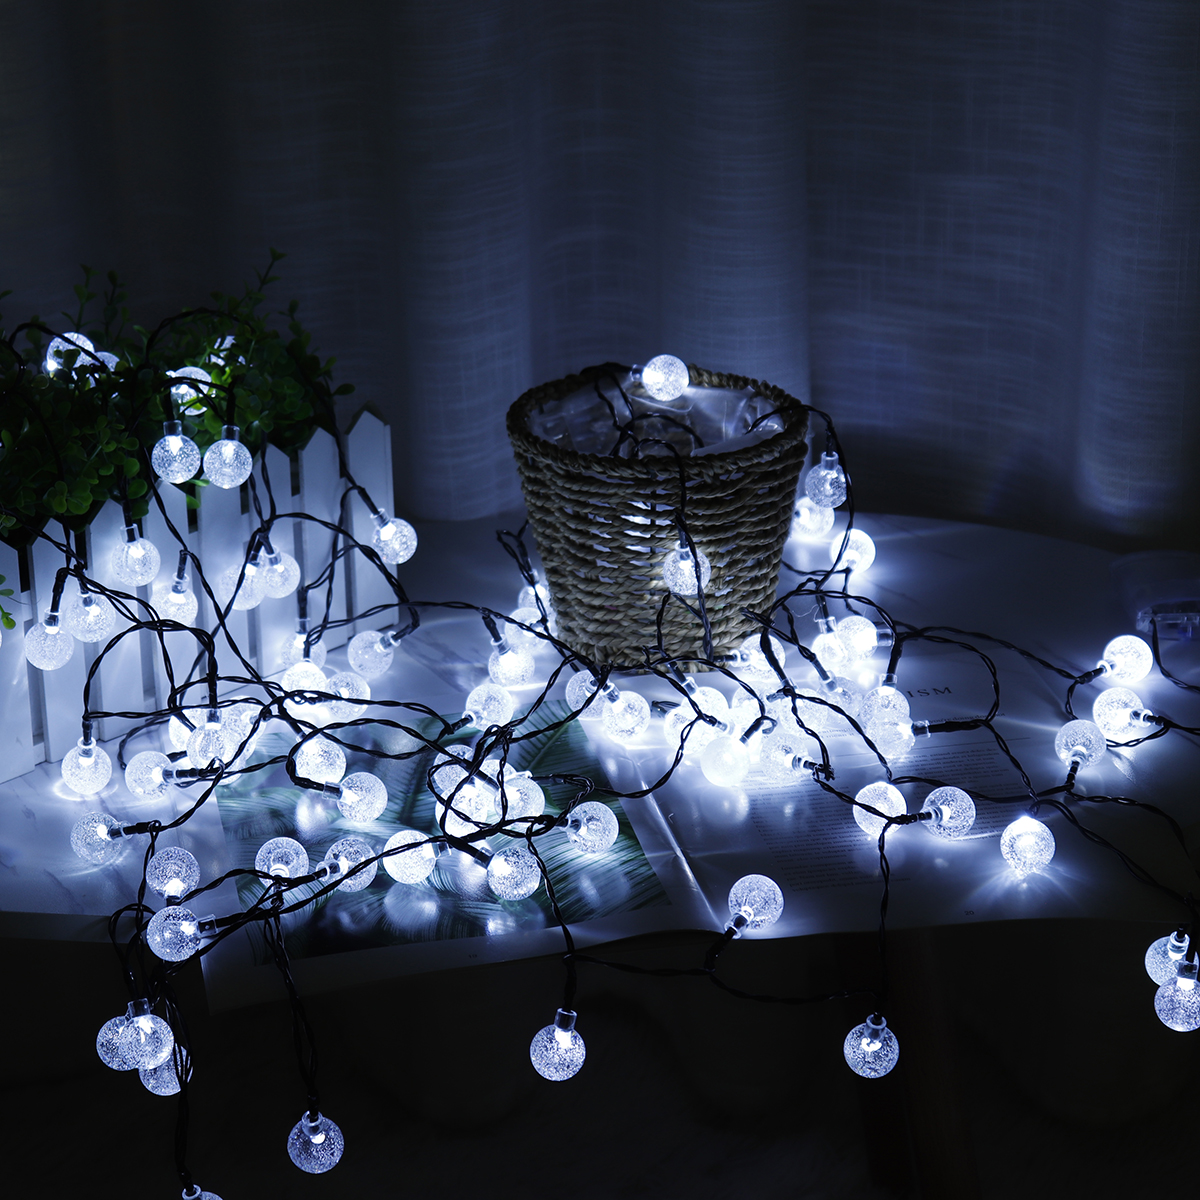 Outdoor-95M-50LEDs-String-Ball-Light-Remote-Control-8-Modes-Waterproof-Garden-Party-Wedding-Christma-1747631-10